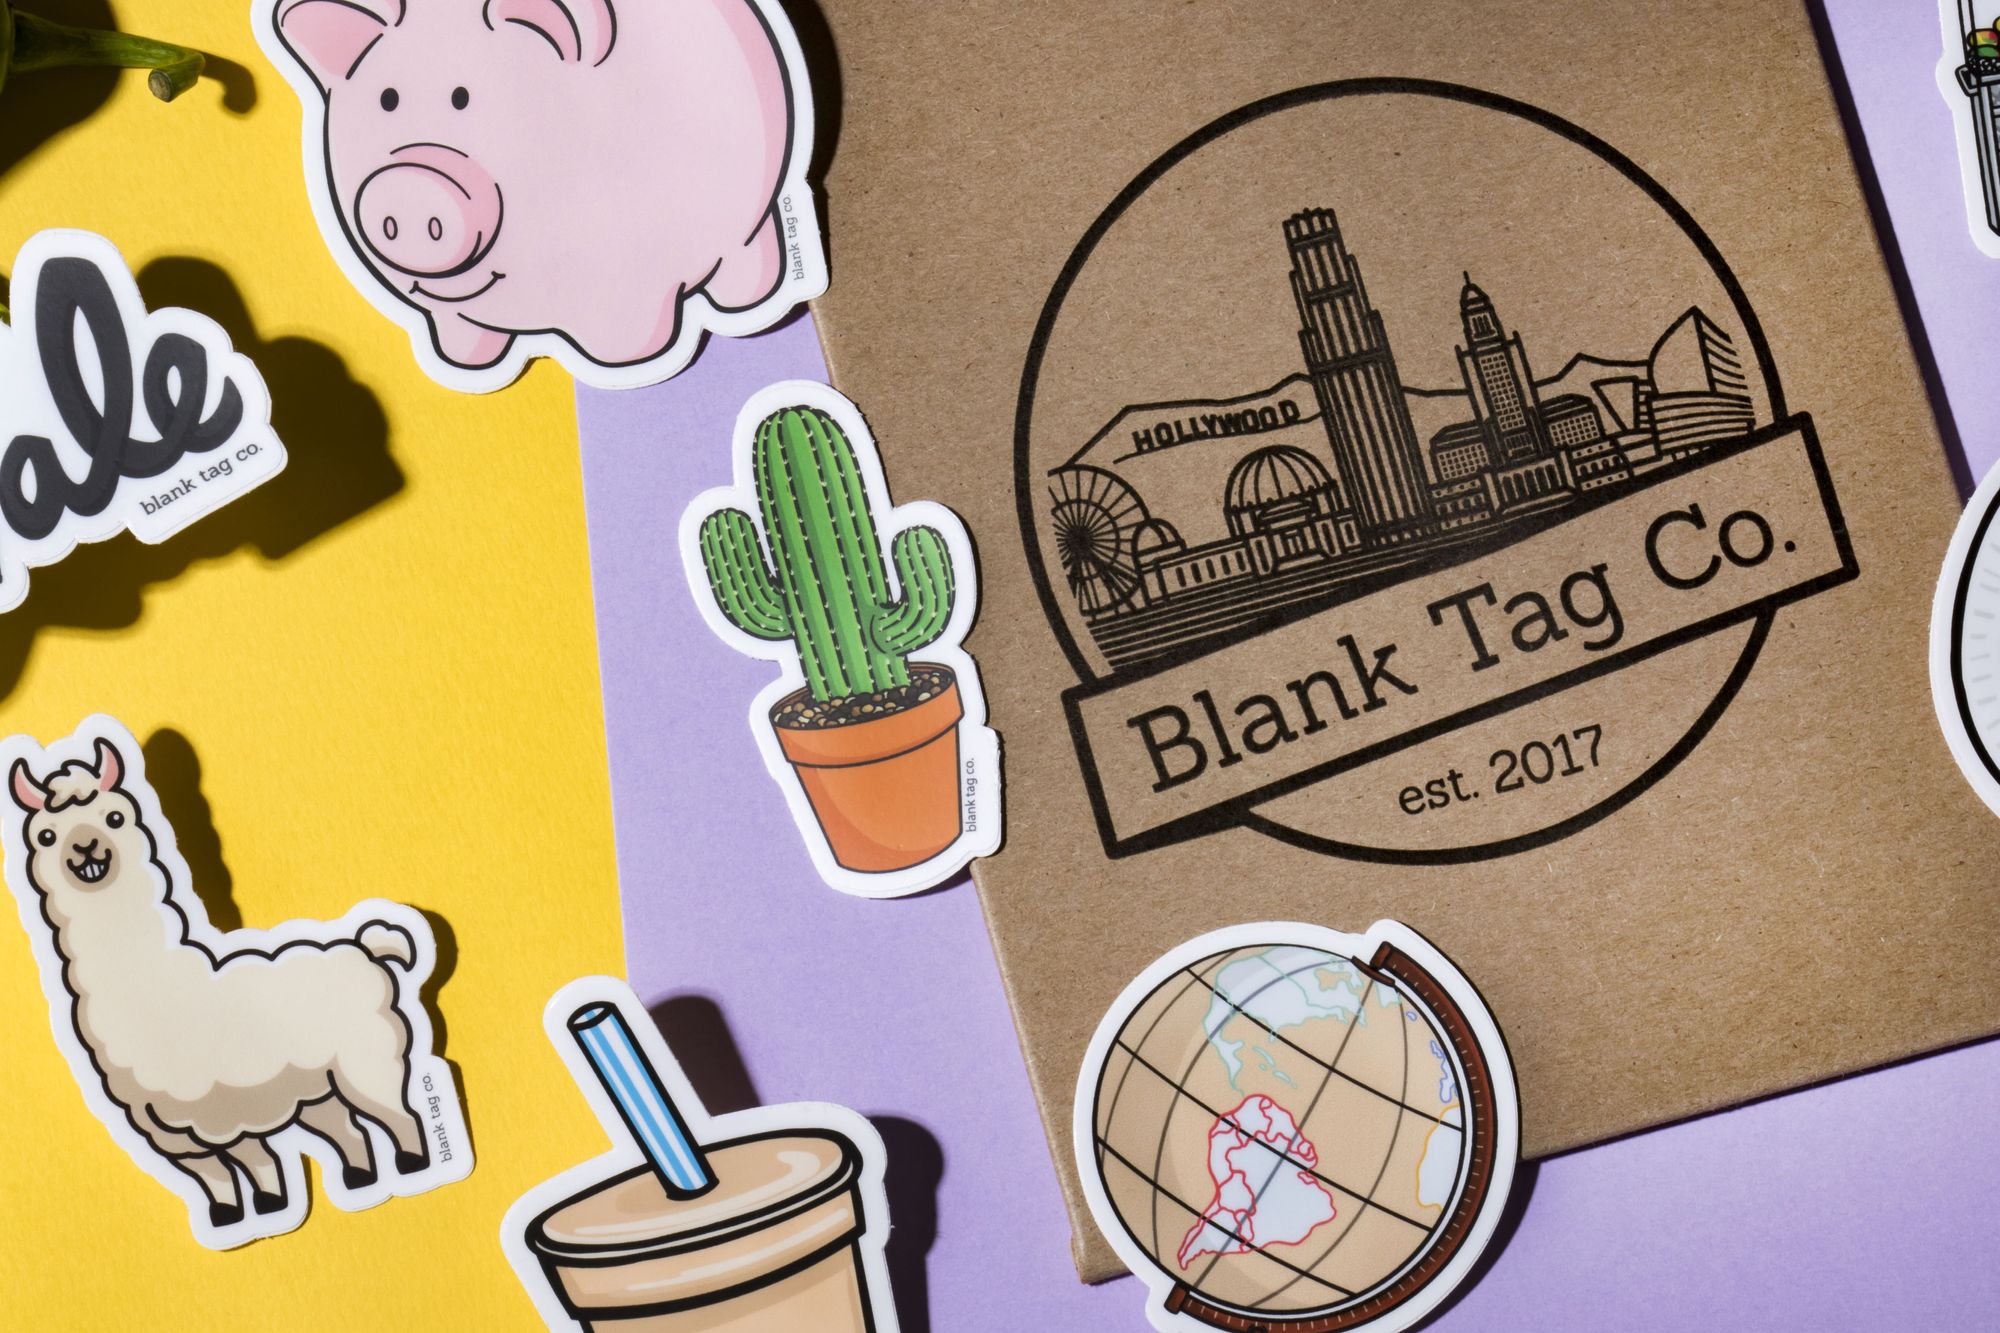 15 latino and latina-owned businesses to support during hispanic heritage month blog photo of blank tag co. stickers and logo